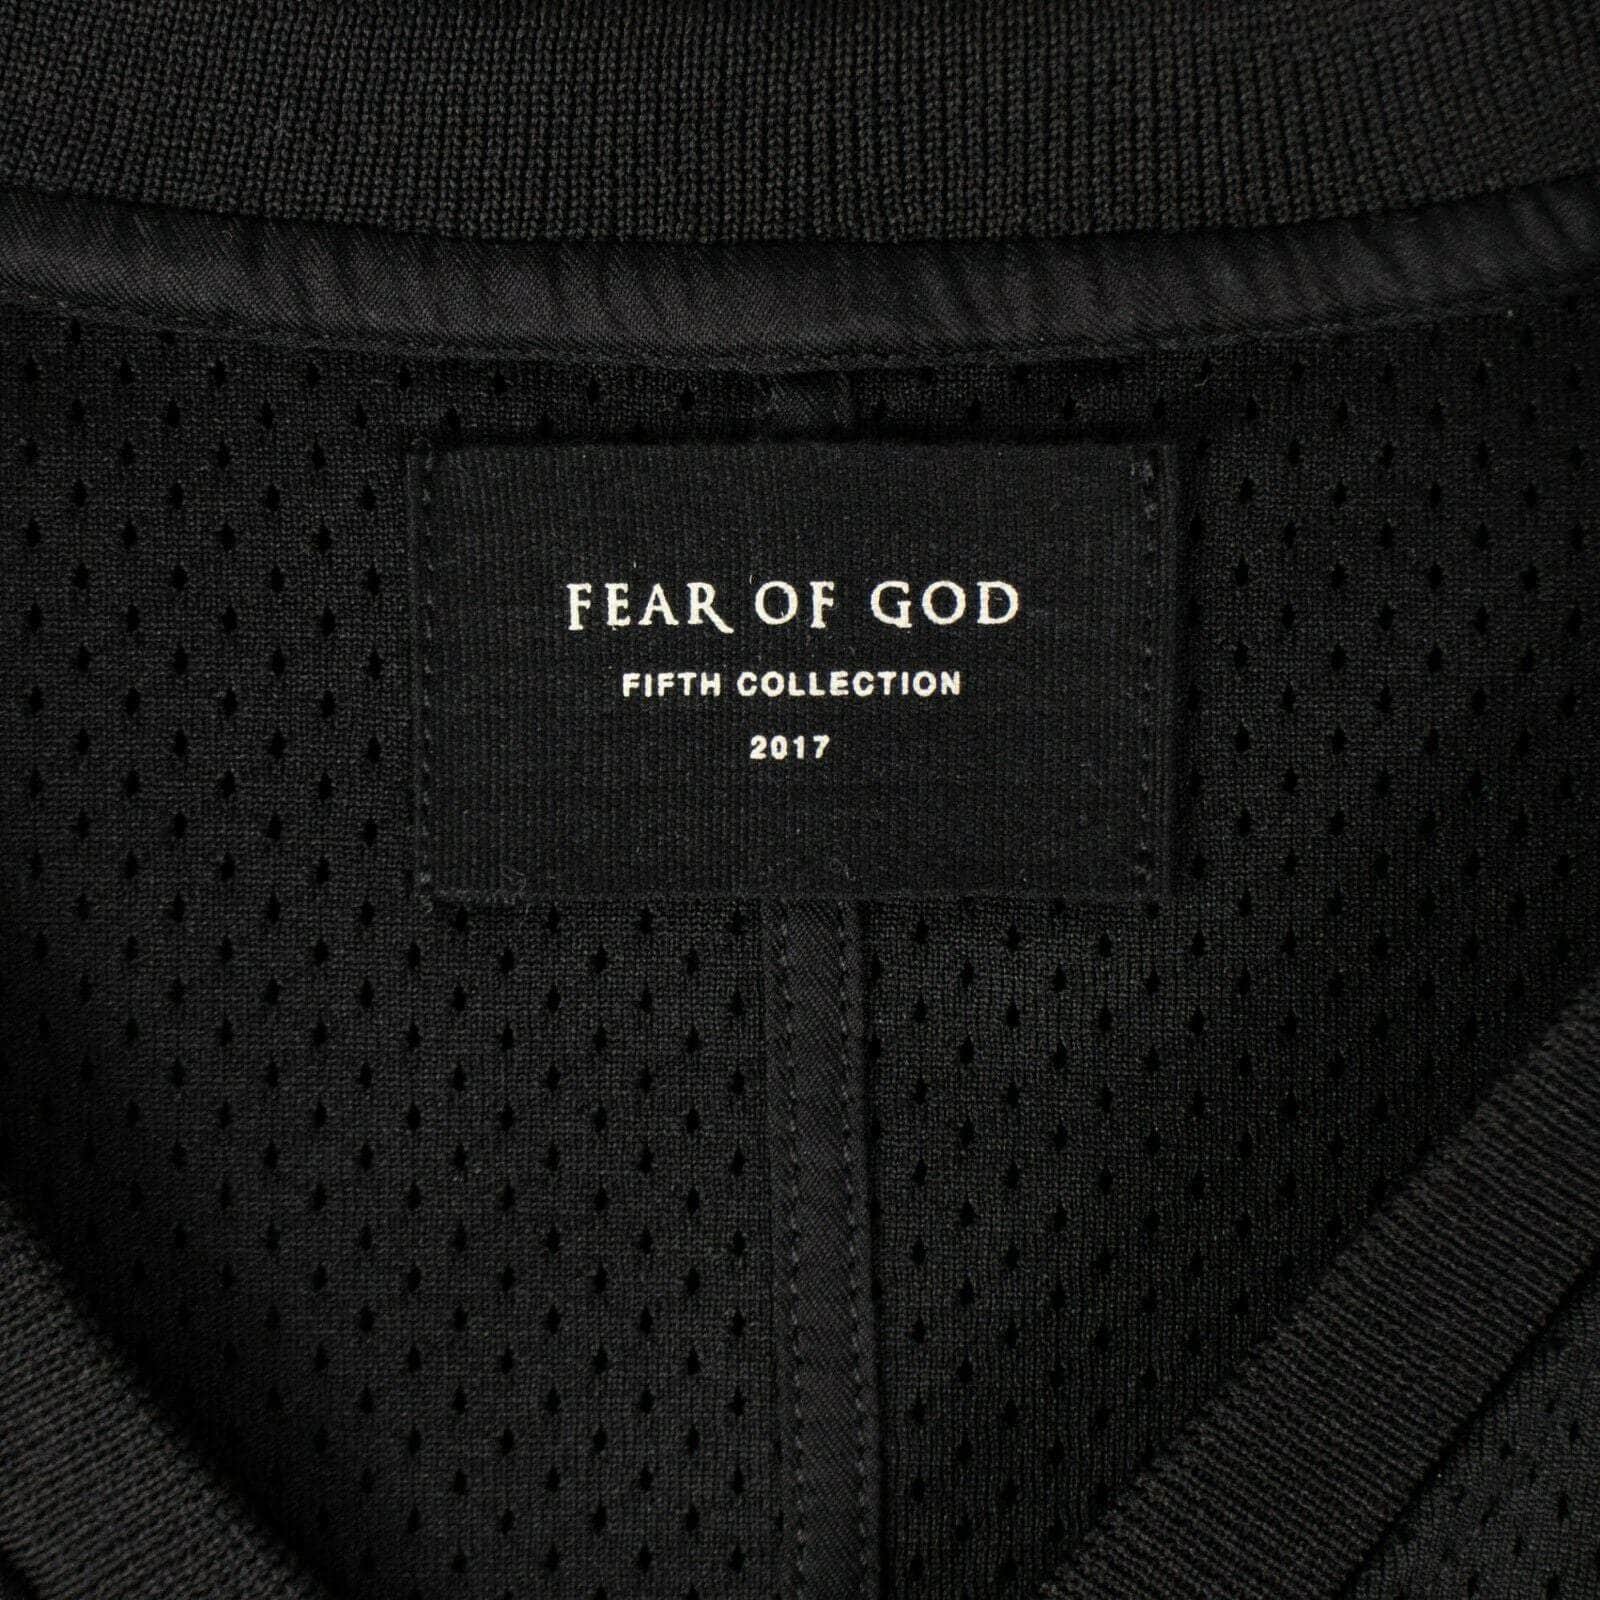 Fear Of God channelenable-all, chicmi, couponcollection, main-accessories, shop375, size-sm, Stadium Goods, uncategorized, under-250 SM Black Mesh Short Sleeve Football Jersey 65LE-1006/SM 65LE-1006/SM